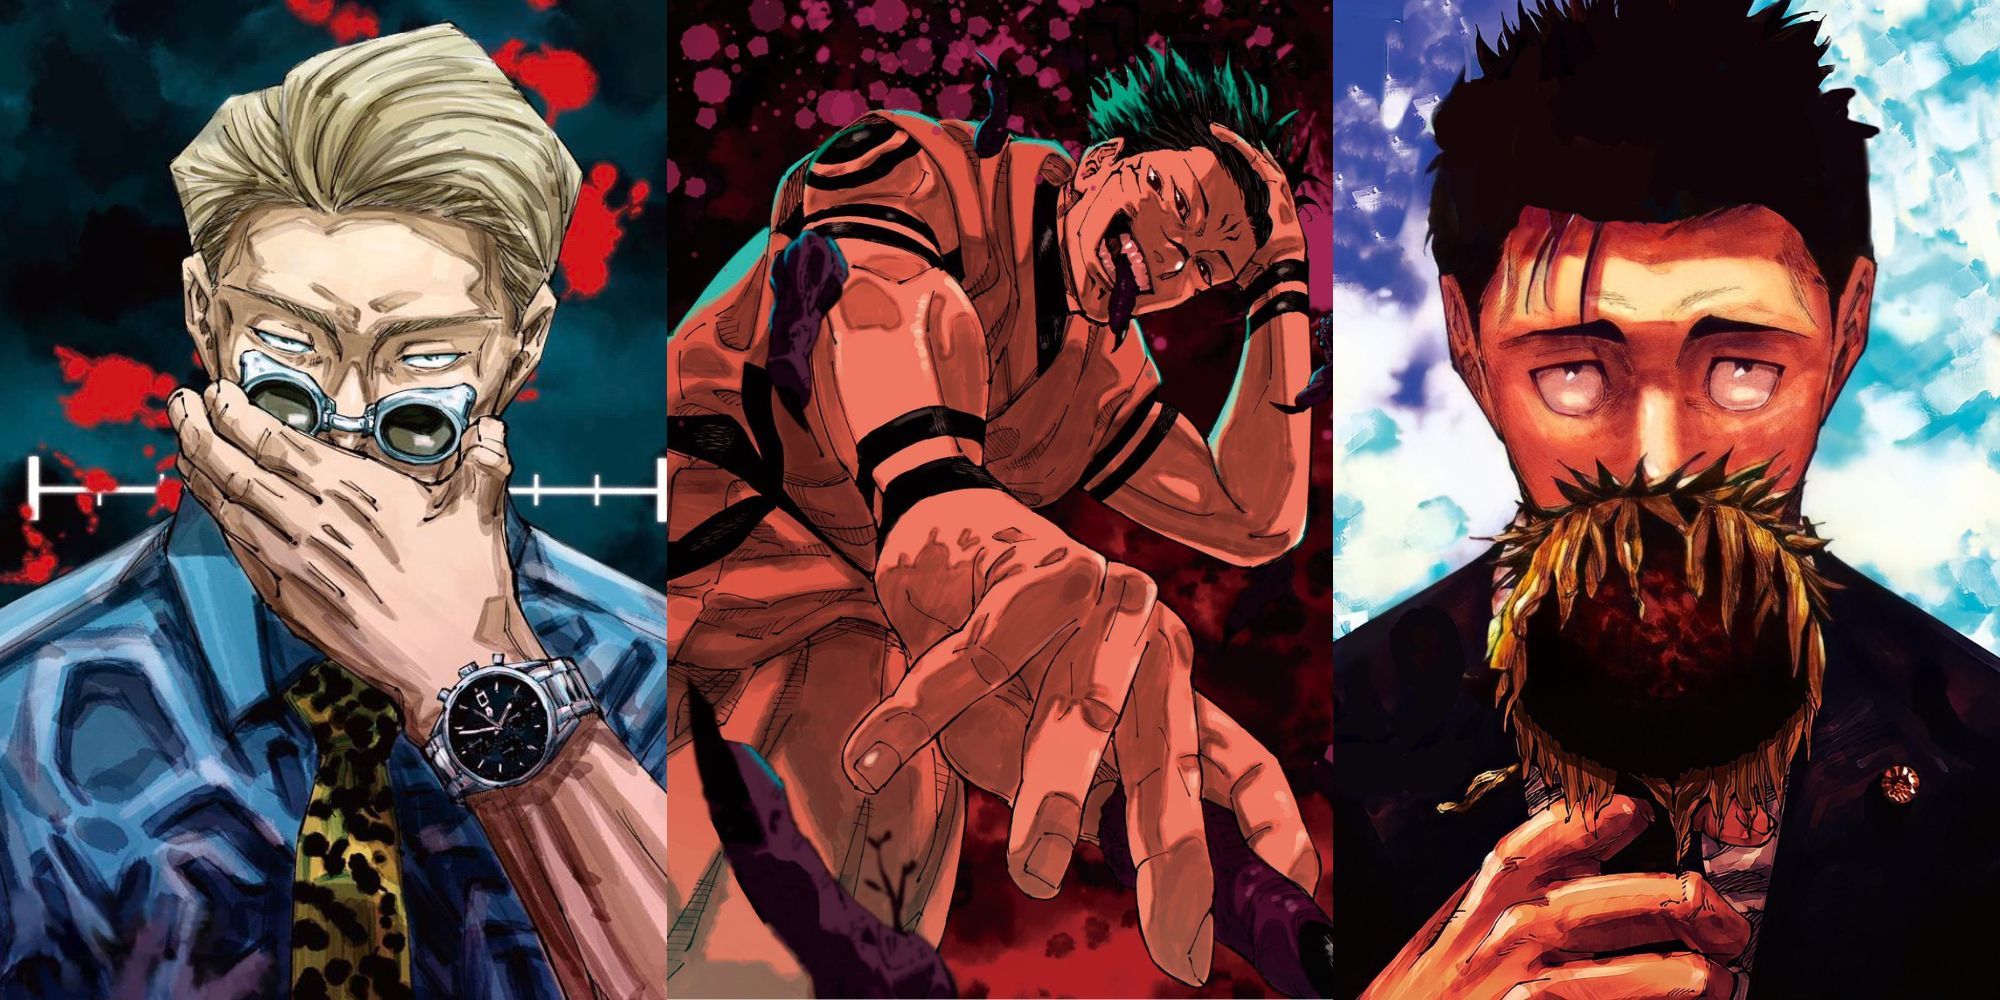 A collage of the covers from Volumes 11, 25 and 19 of Jujutsu Kaisen, featuring Kento Nanami, Ryomen Sukuna and Hiromi Hiruguma. 